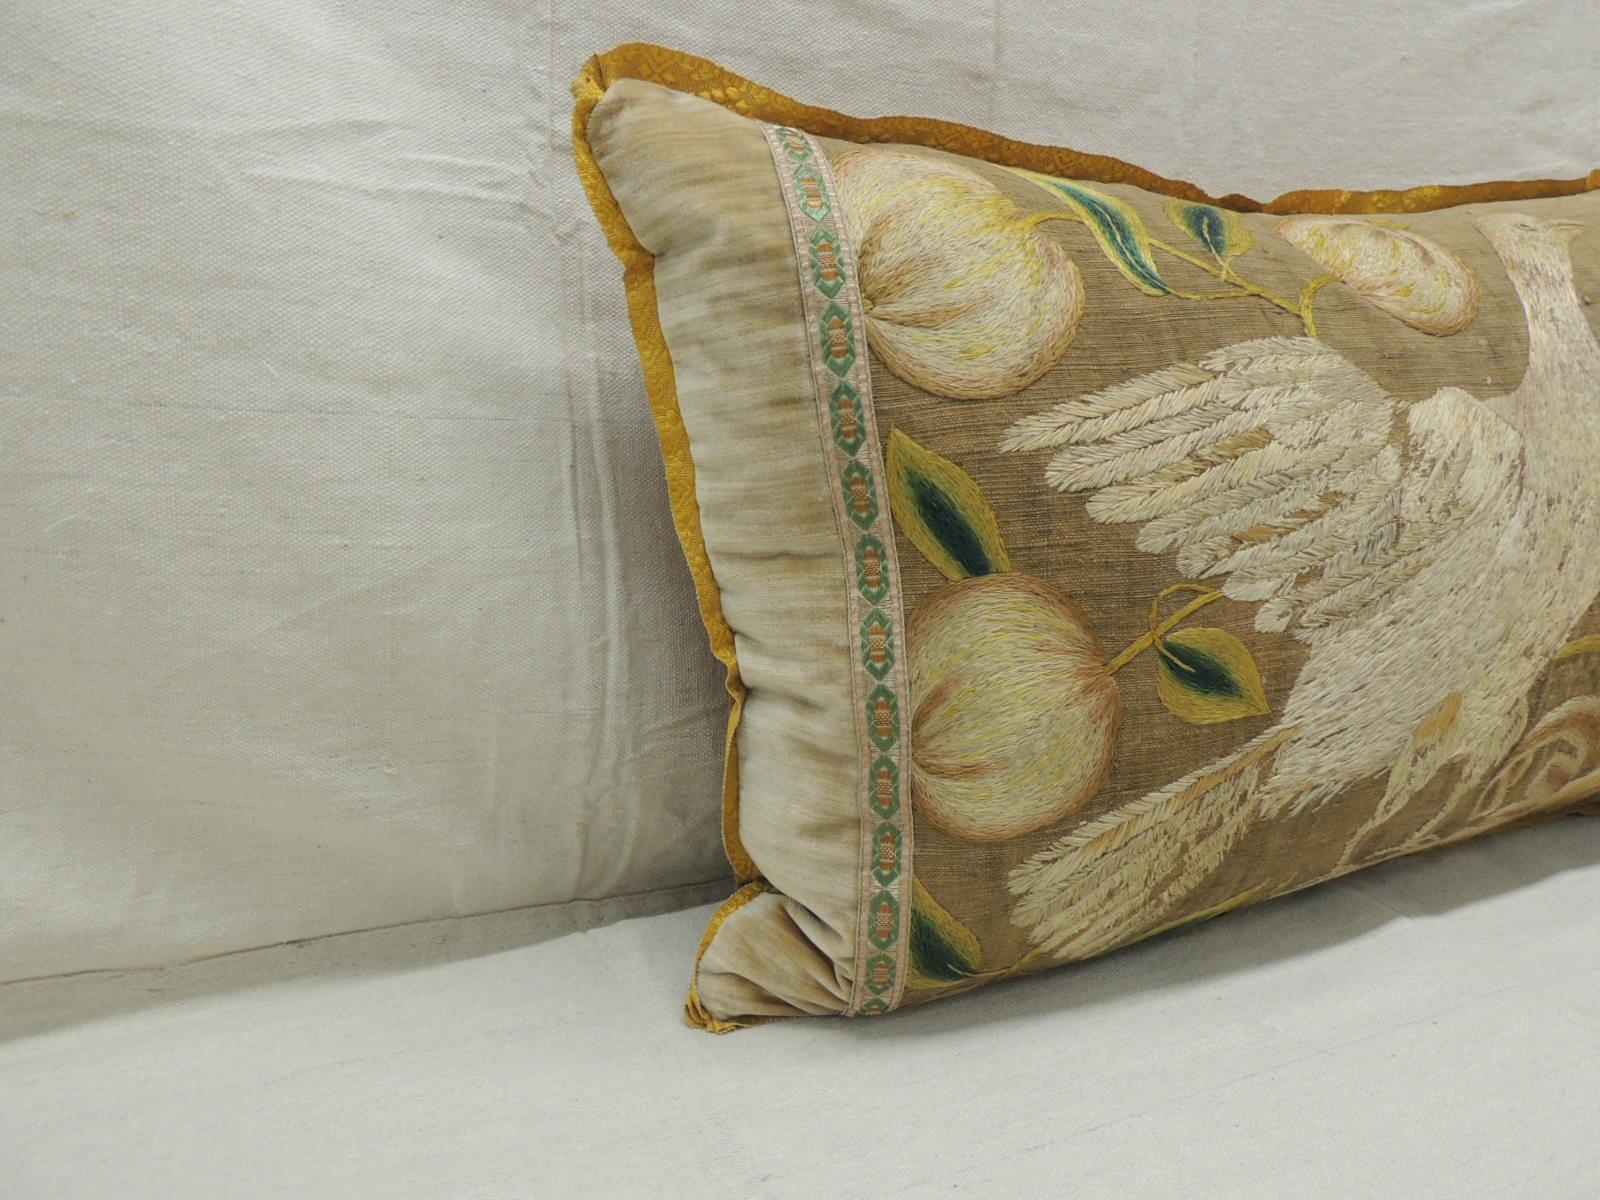 Antique Venetian gold and green floral embroidered bolster decorative pillow.
Italian floral silk floss thread embroidered on linen.
Embellish with antique gold trim.
Framed with antique strie tan tone-on-tone silk velvet panels.
In shades of